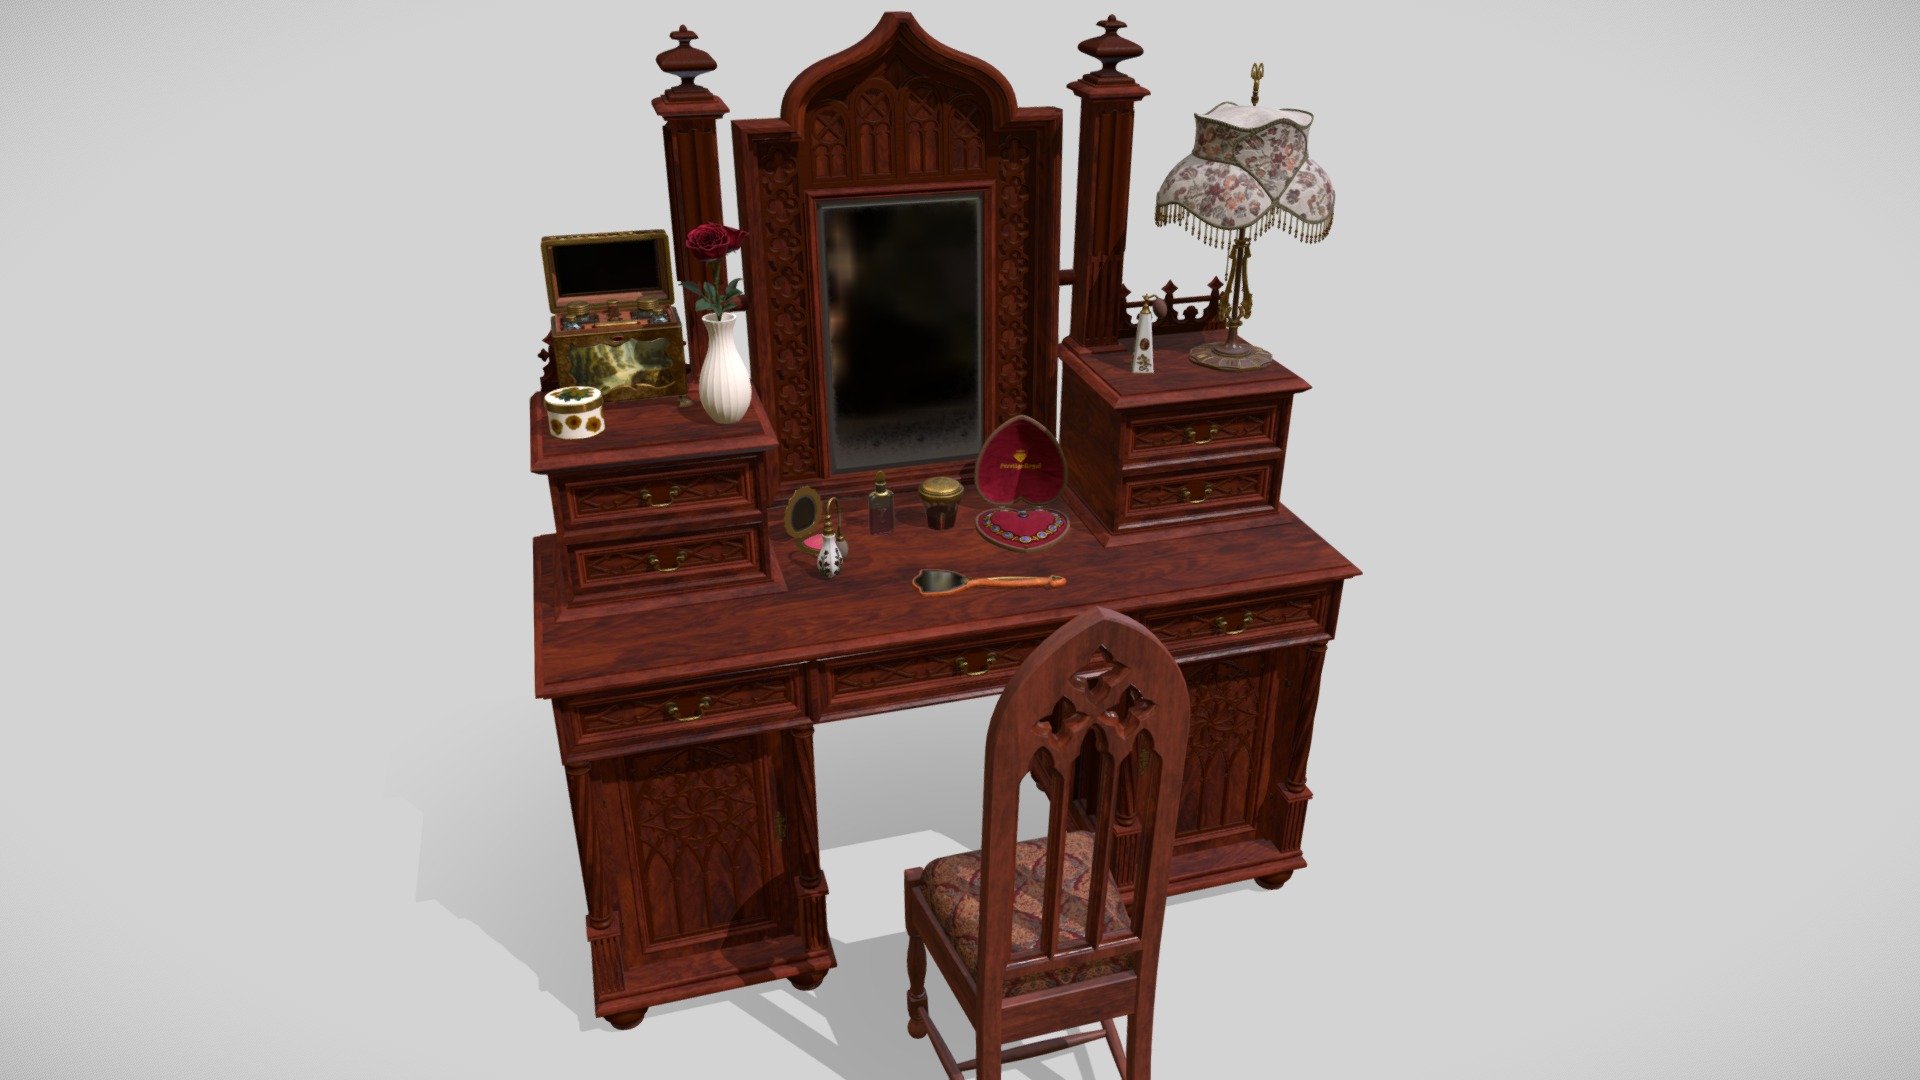 Openable decorated Victorian dressing table with lots of props such as jewelry box, necklace, hand mirror, hairbrush, makeup boxes and bottles, lipstick, tweezers, makeup box and decorated perfume bottles and not the last make-up travel box . Each drawer and door is openable. As a material, we chose acacia wood in both light and dark variants to highlight the decorations. Great for any Victorian bedroom. 

The models have a LOD and their own collider for easy use as game props. Also included is a collapsed texture: occlusion (R), roughness (G) and metal (B) and an unreal engine 4 project. Also opening / closing animations 3d model